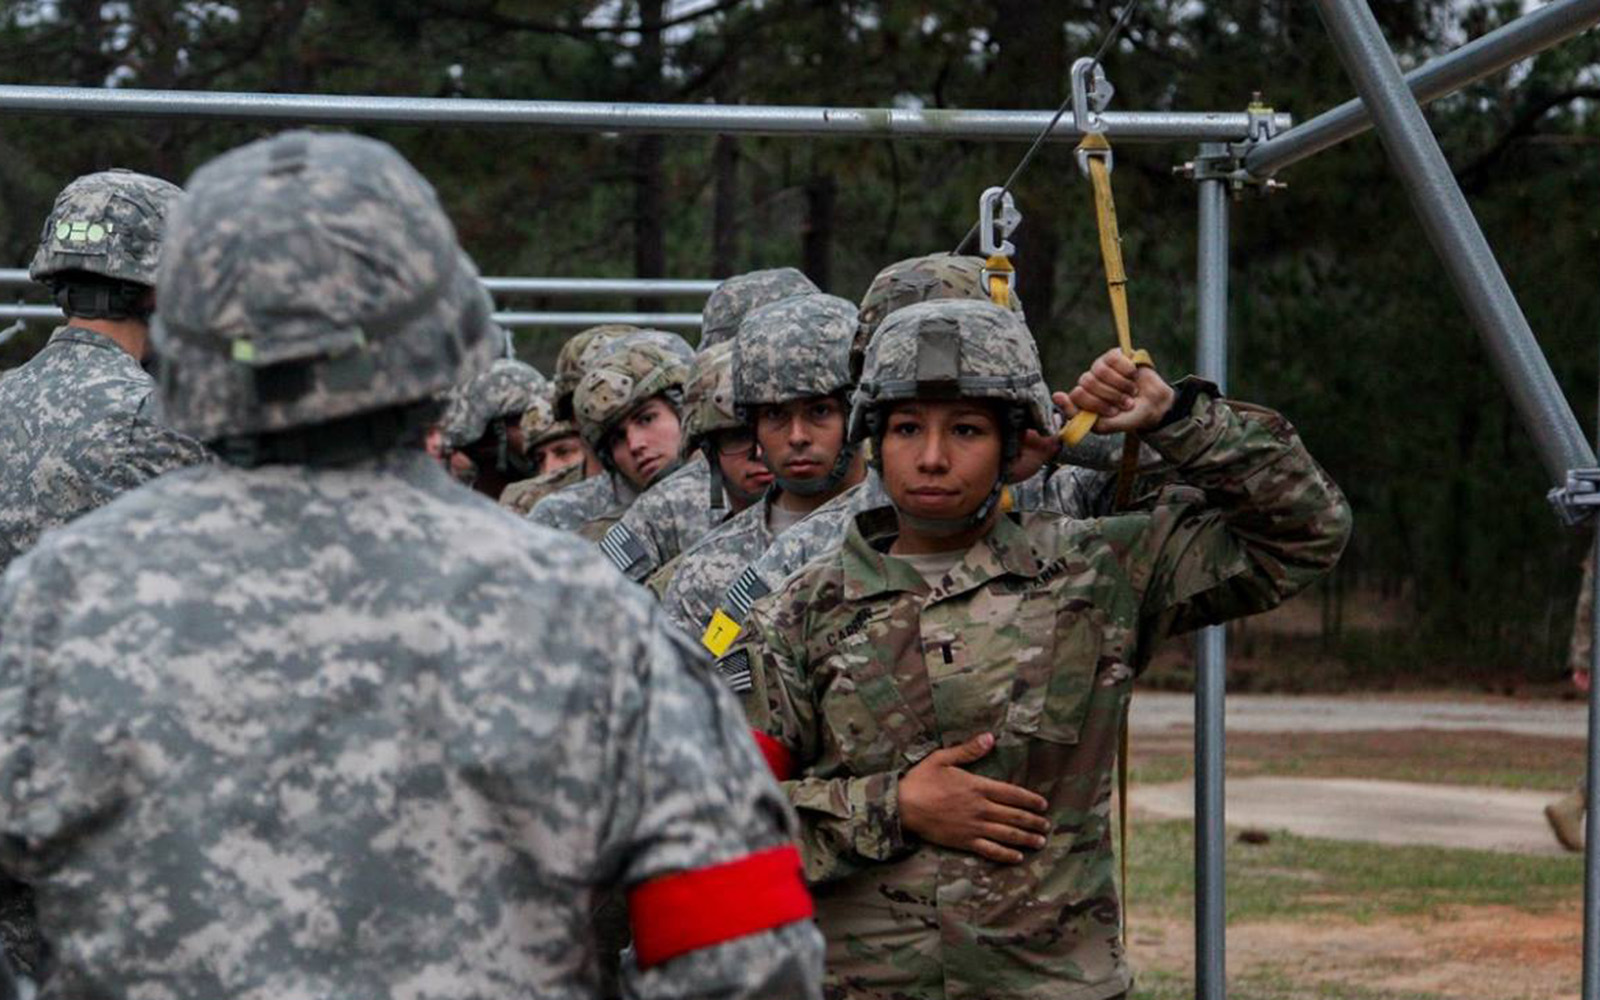 Keslie Carrion in army fatigues with a group of others during a training exercise